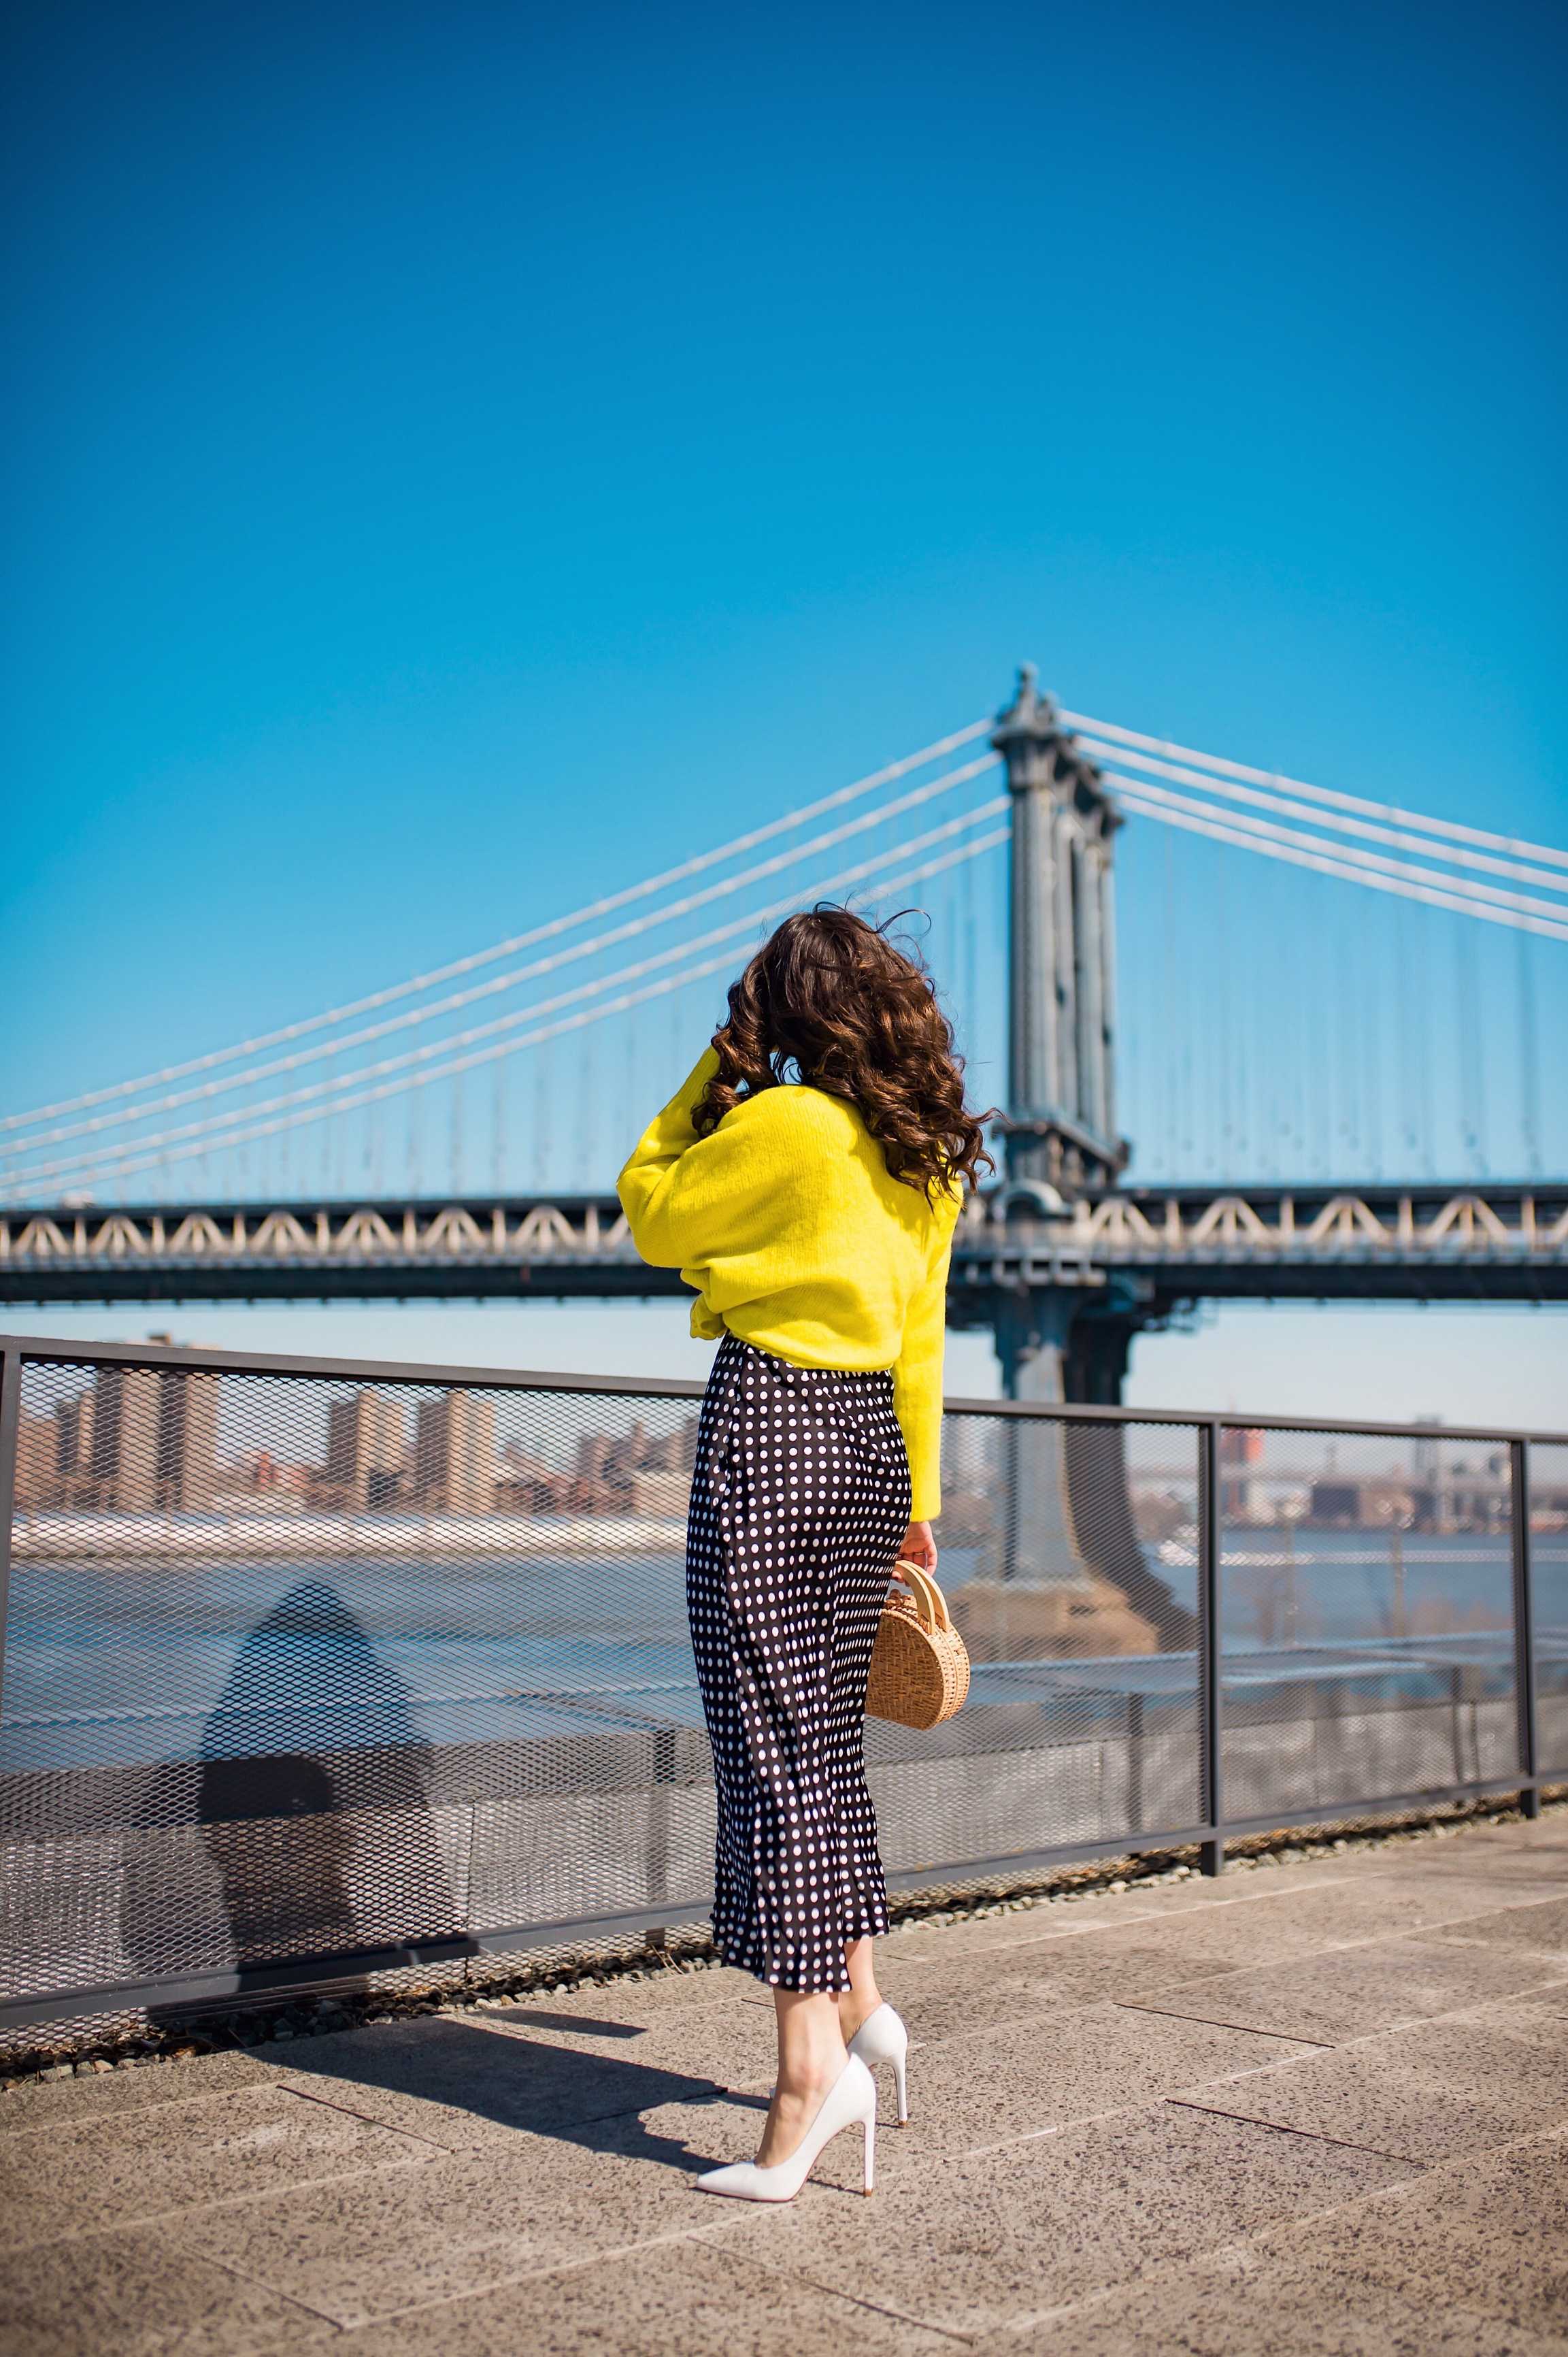 How I Wound Up With Boring White Dishes Navy Polka Dot Dress Neon Yellow Knotted Sweater Esther Santer Fashion Blog NYC Street Style Blogger Outfit OOTD Trendy Shopping Girl What How To Wear White Heels Dumbo Brooklyn Bridge Photoshoot Laurel Creative.JPG